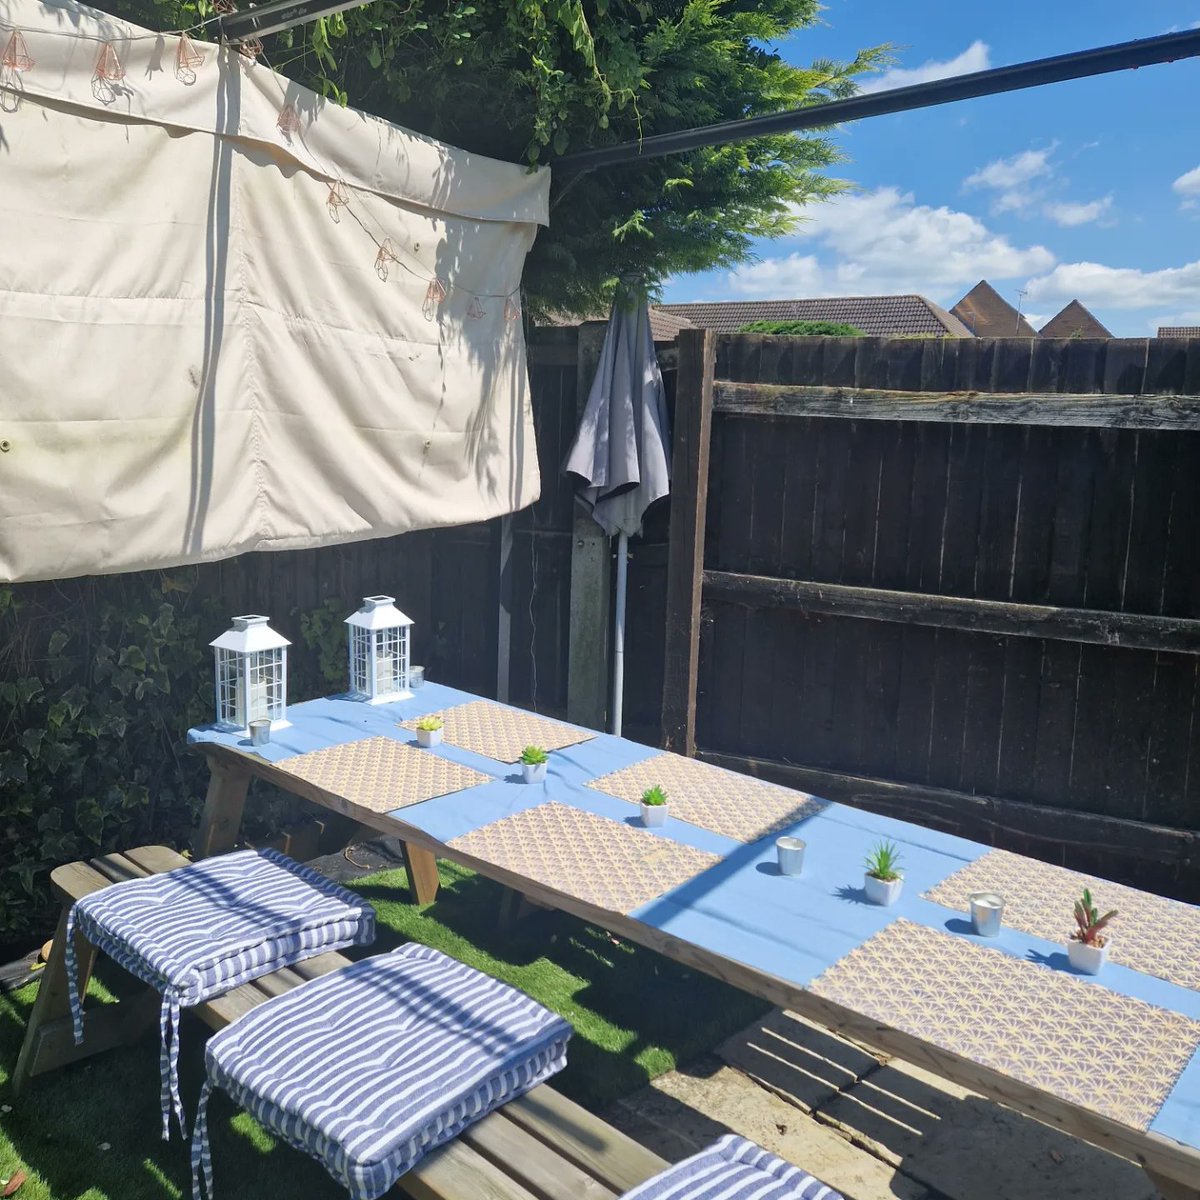 Got my summer outdoor dining table decorations & place settings all ready! Lots more to add & style 😎 #alfrescomeals #summerfood #socialtimes #firstattempt #enjoyingcompany #forgottotakepics